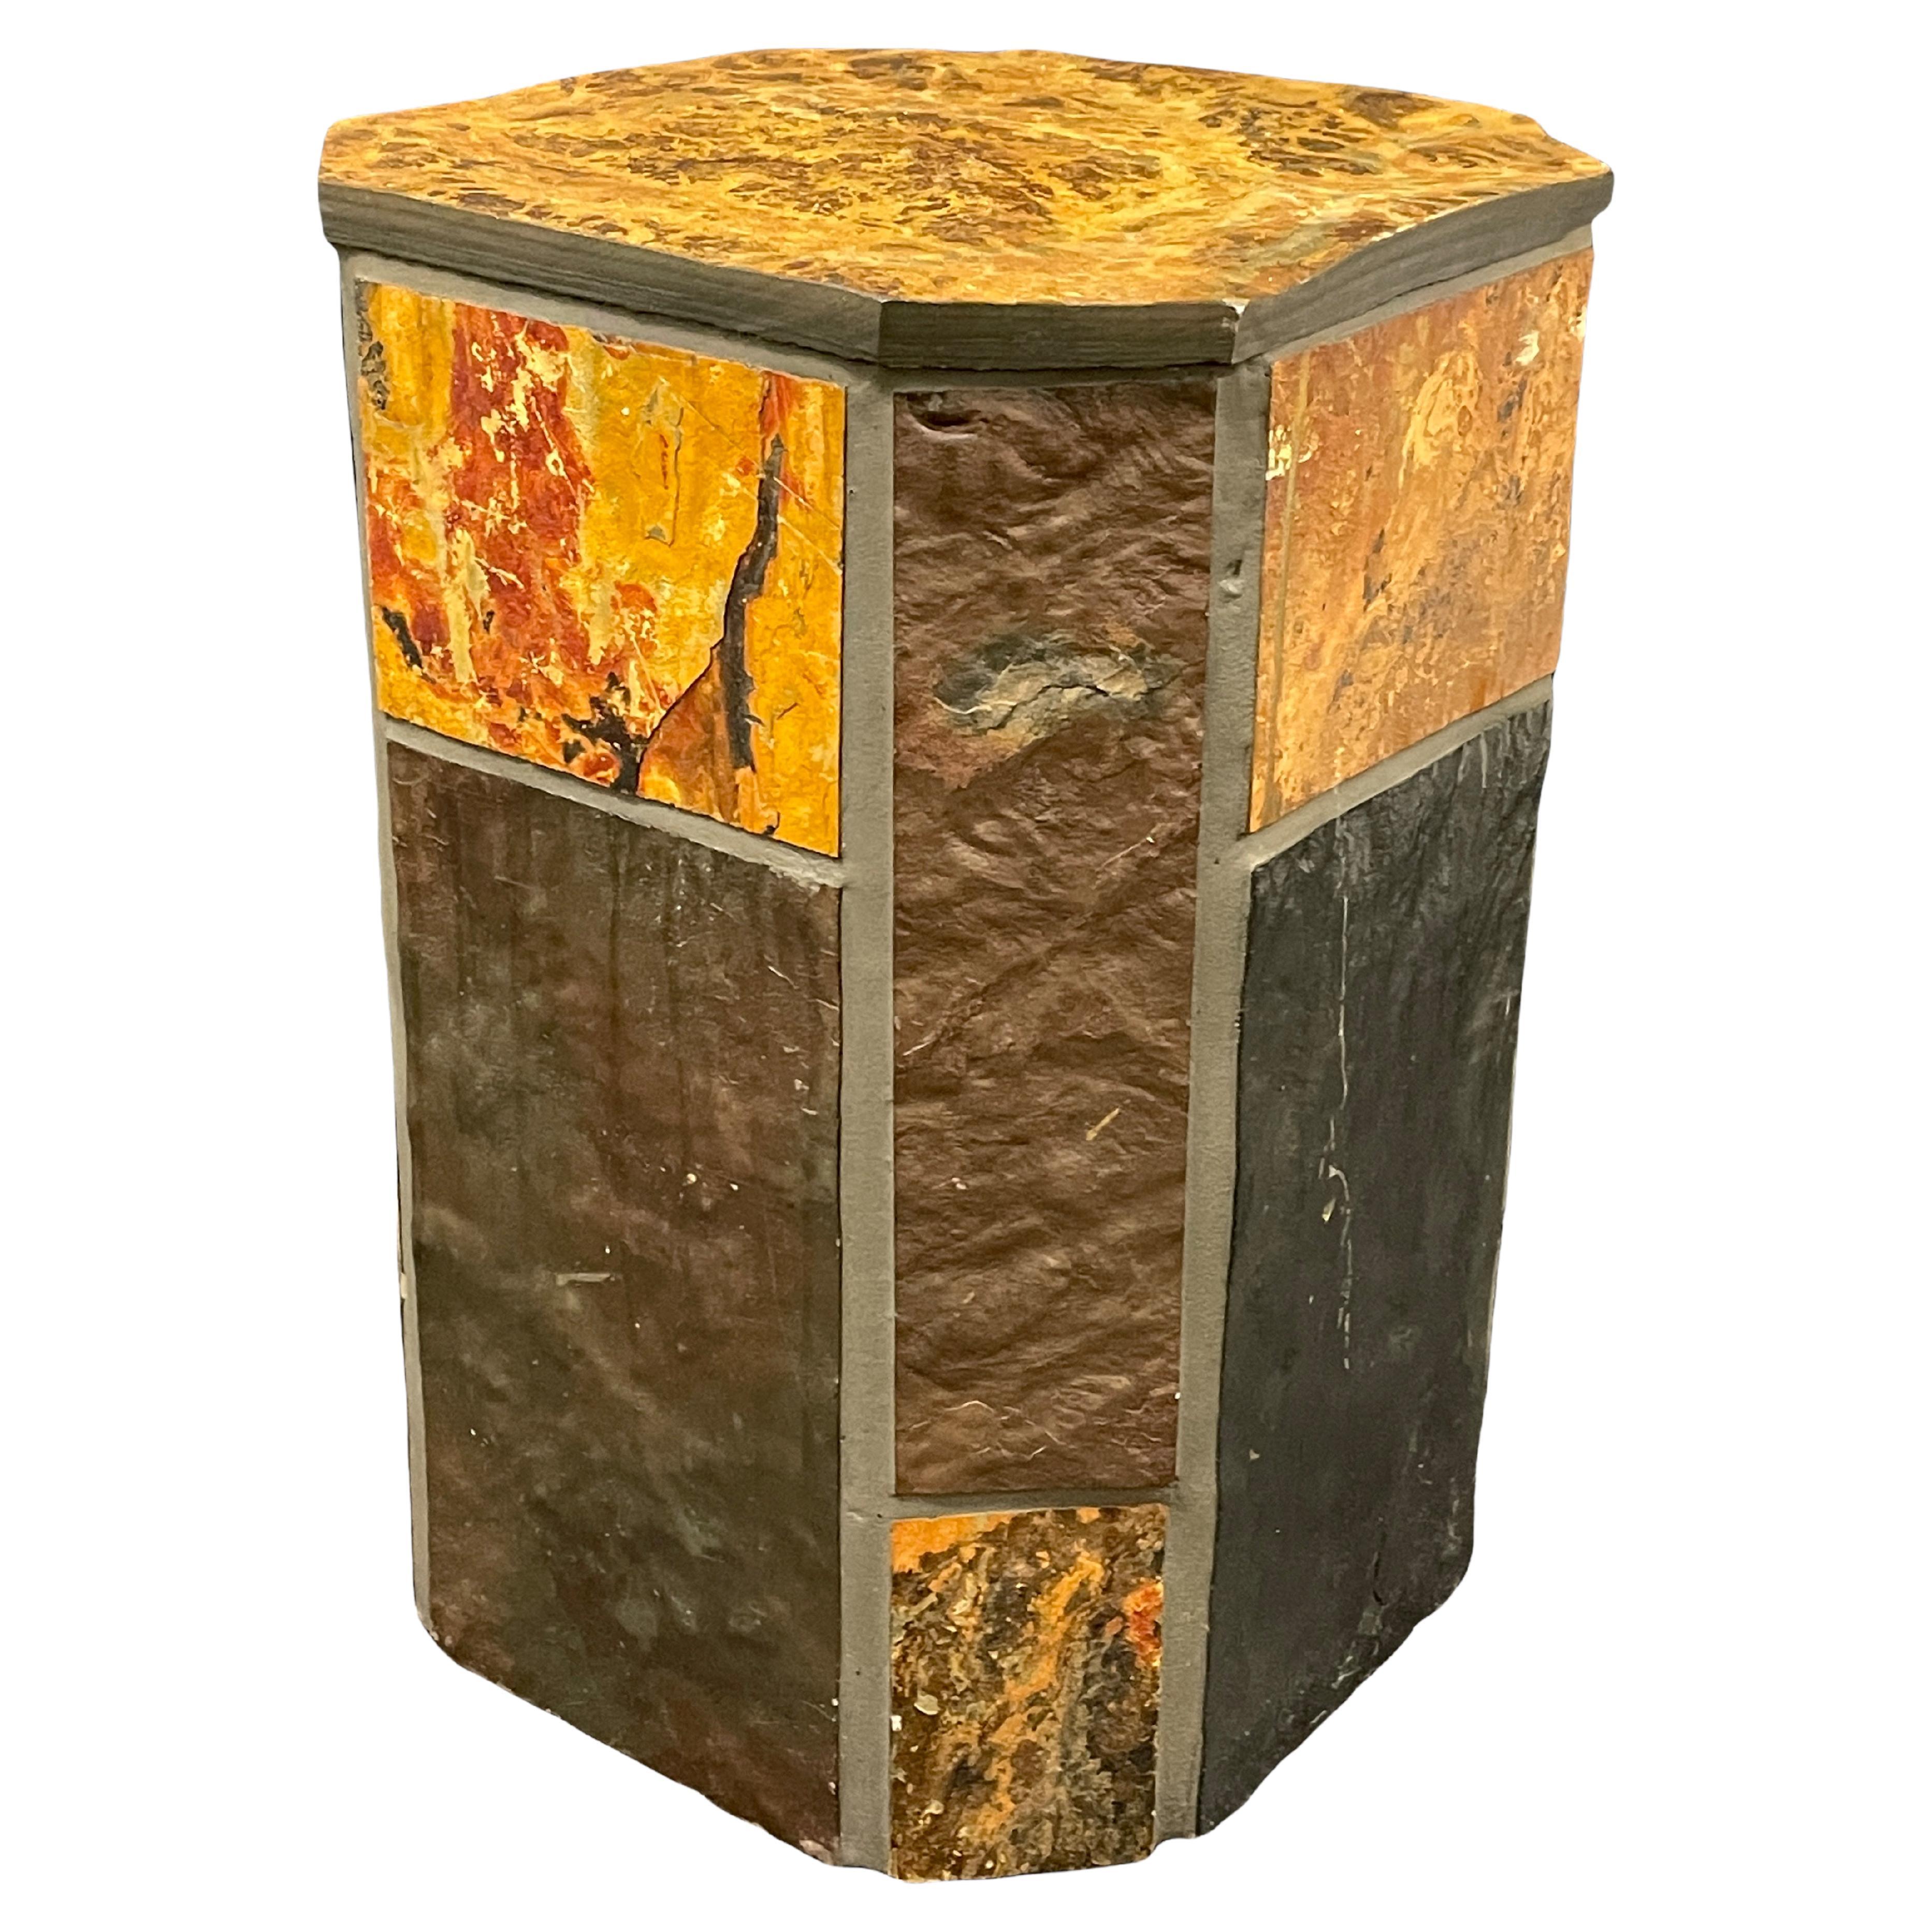 Heavy Brutalist Style Pedestal, Slate, Wood and Concrete, 1960s Dutch For Sale